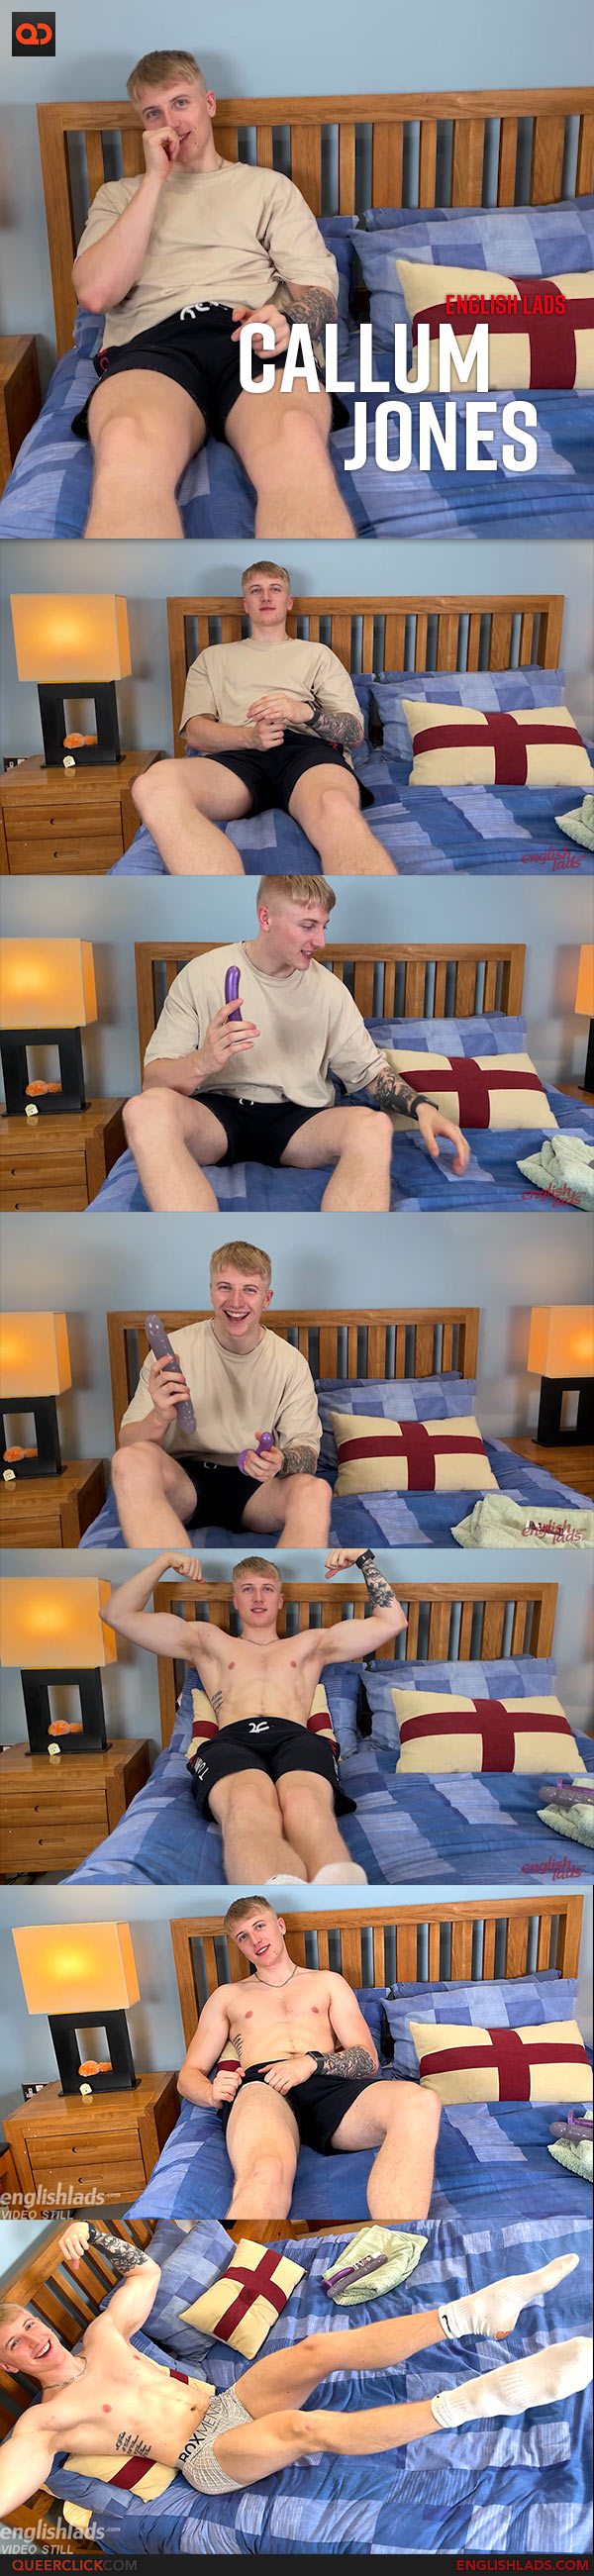 English Lads: Straight Blond Pup Callum Jones Pumps his Tight Hole with the Big Pink Dildo